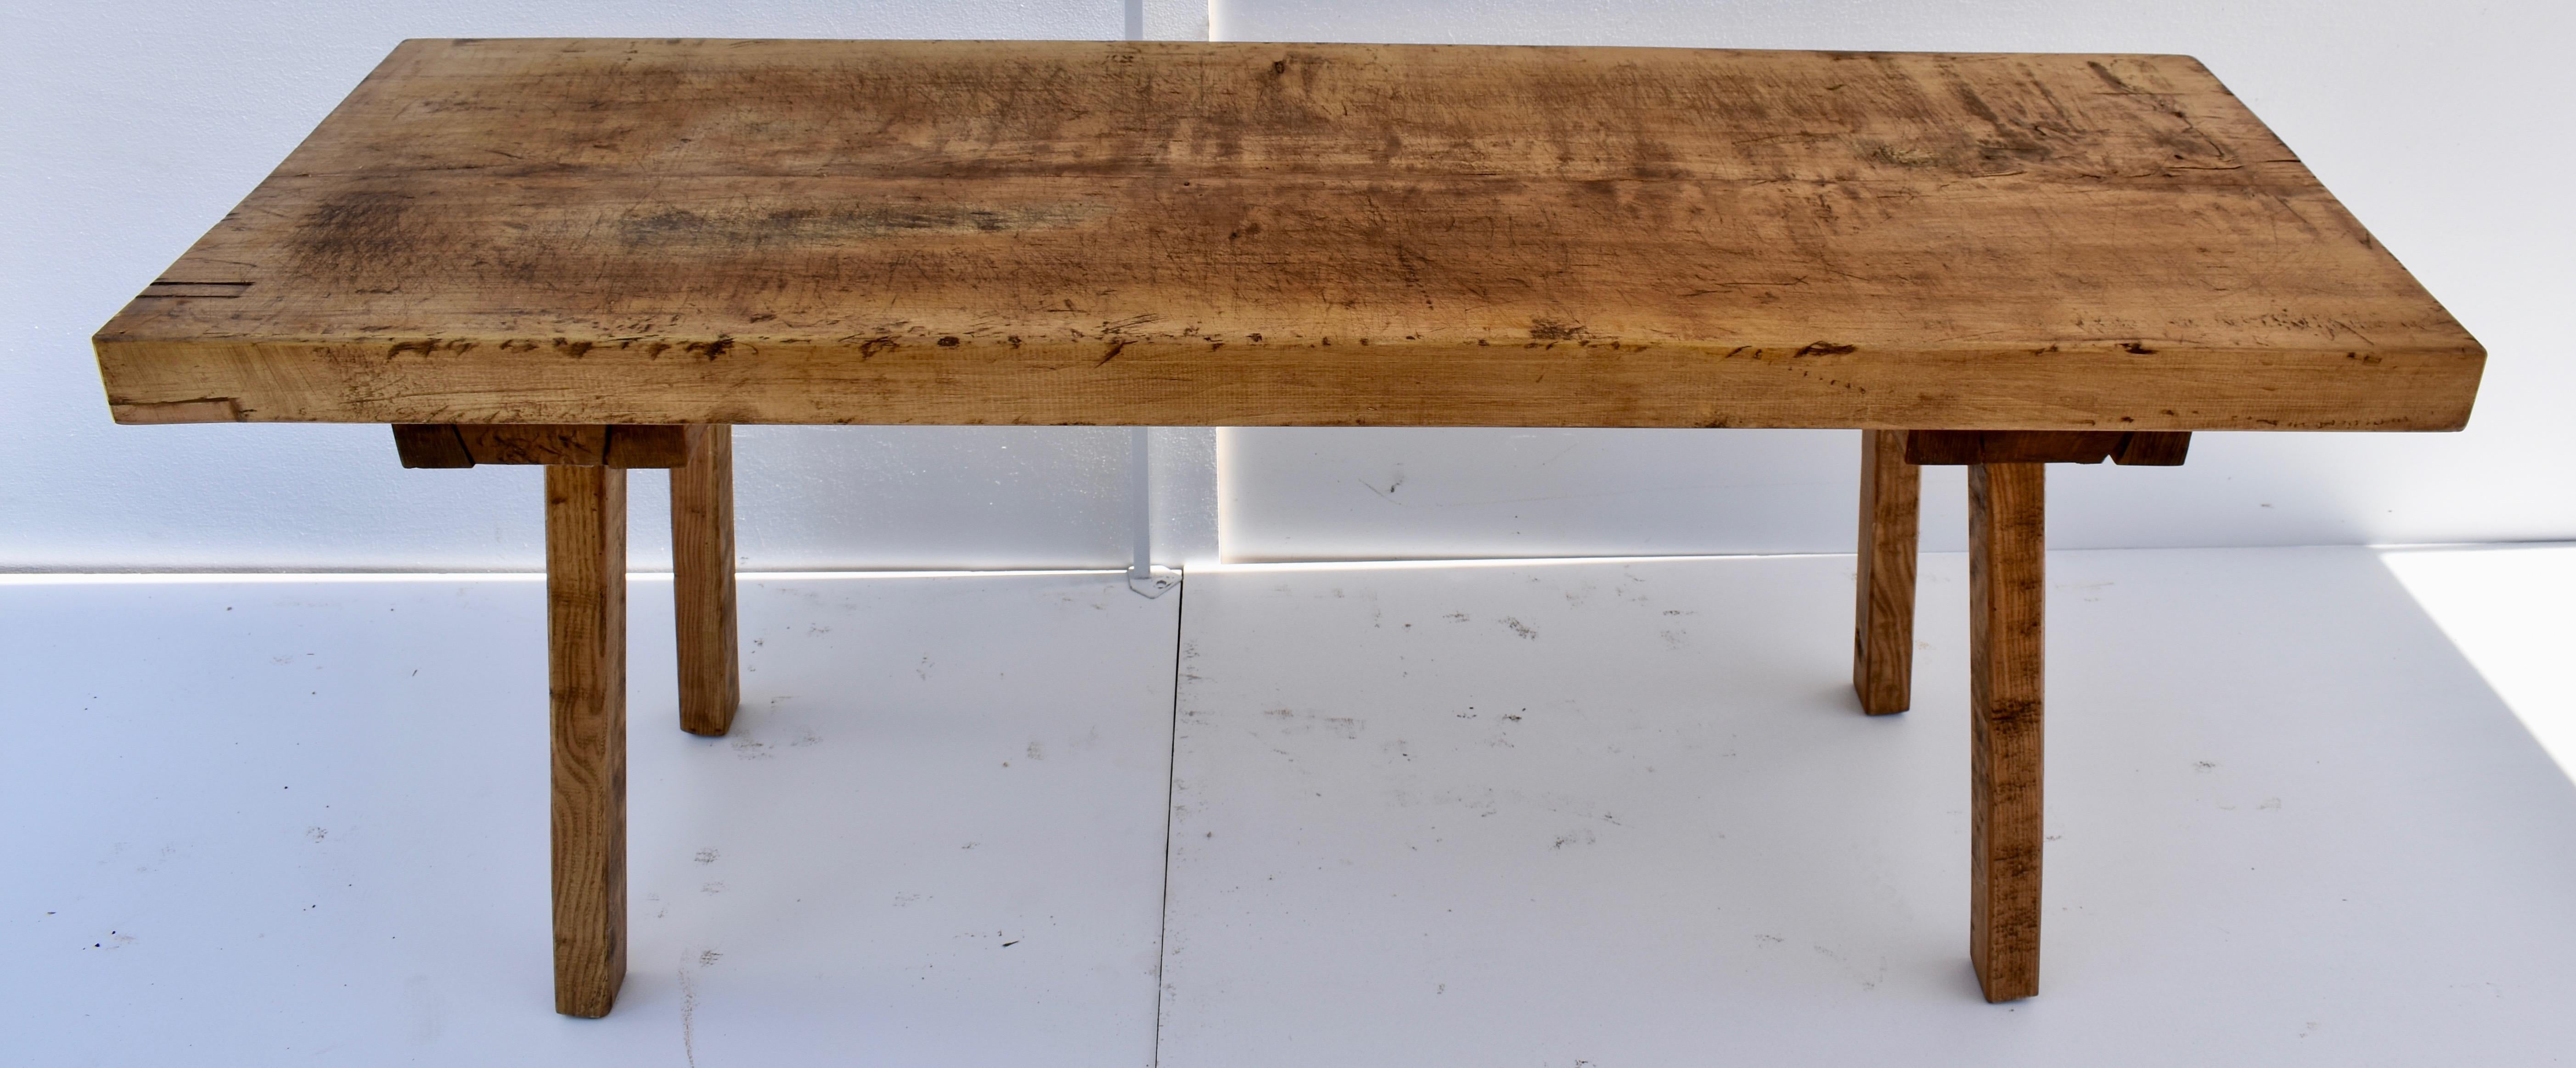 This massive oak pig bench butcher’s block has a single 3” thick slab for a top. The hand-hewn splayed legs are mortised into sturdy cross members which are screwed to the underside of the slab. These make great side tables, sofa, or work tables, or